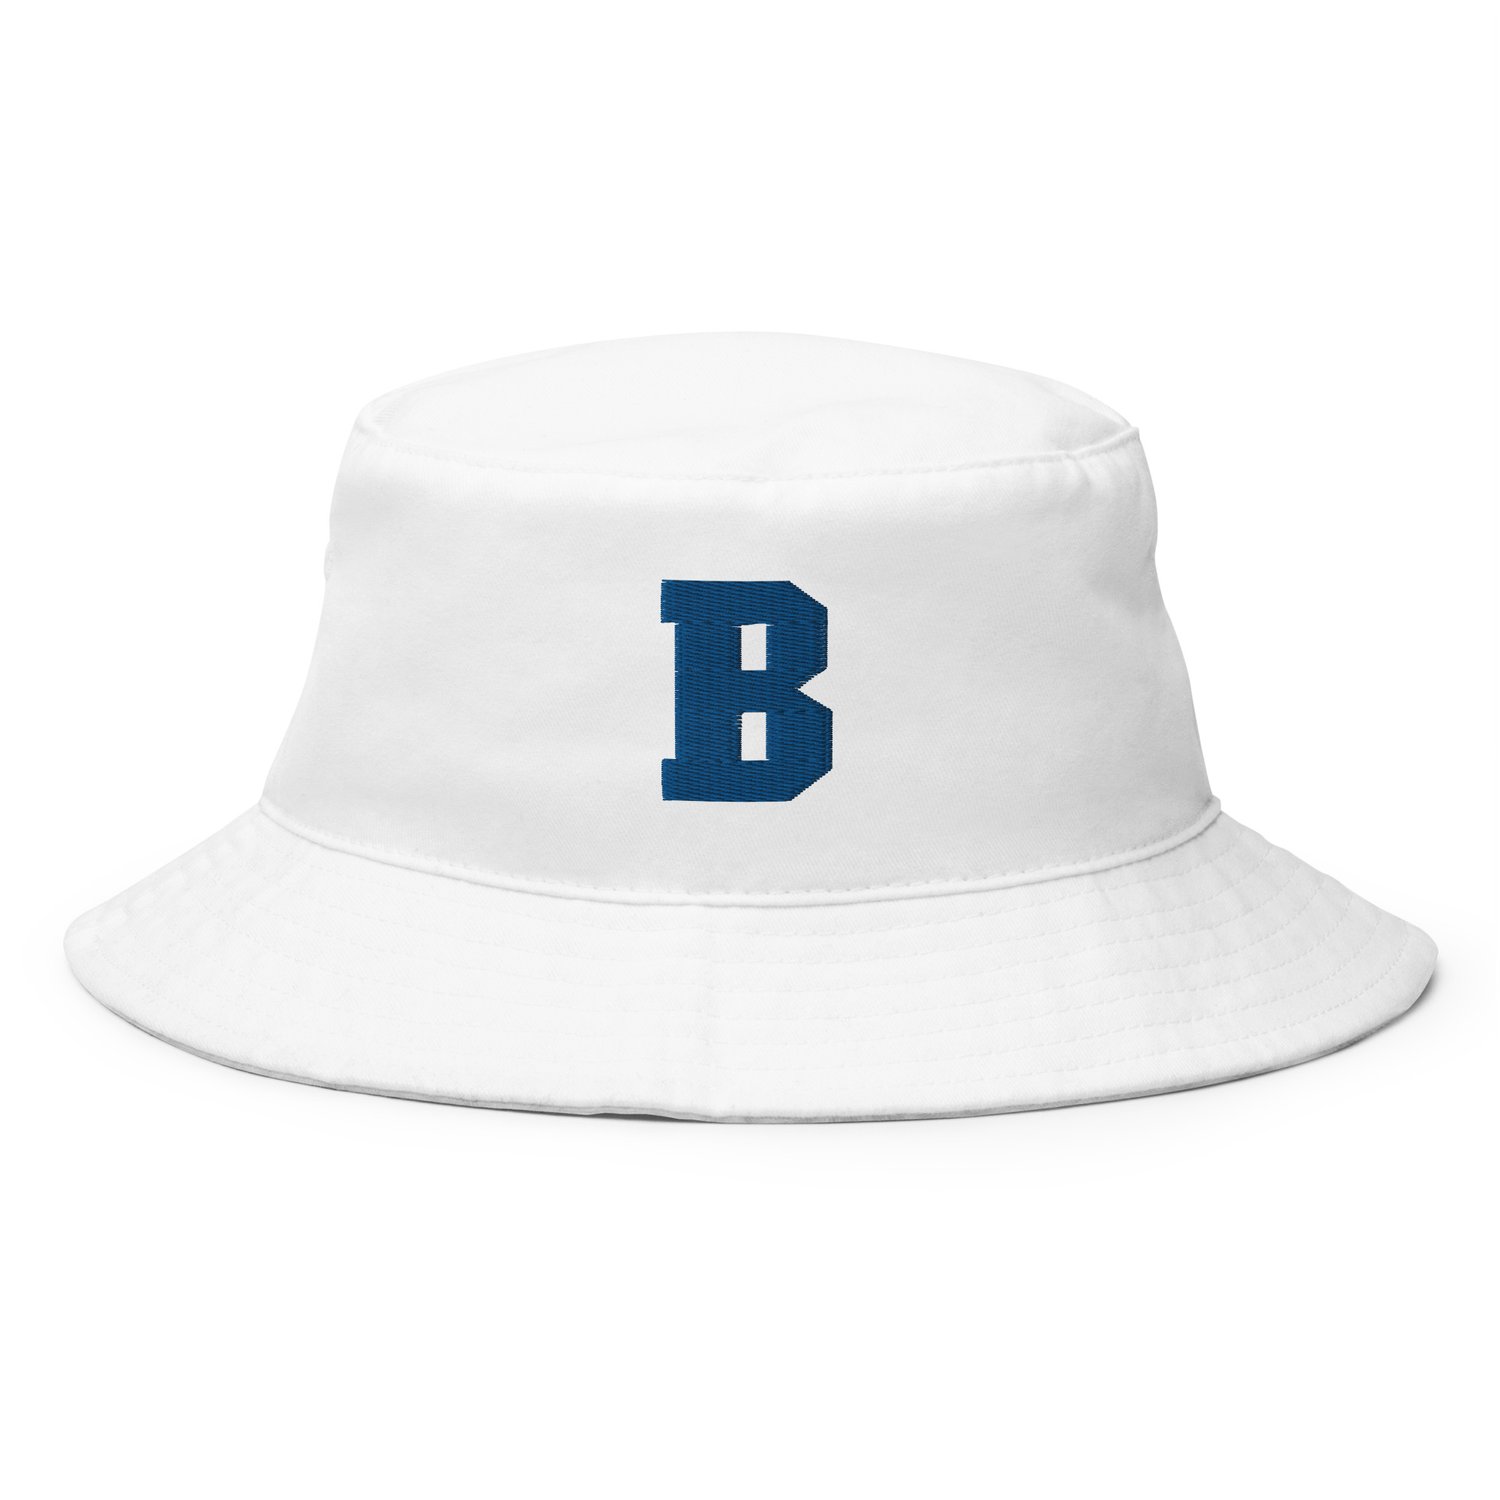 B is for Bucket Hat BAY — ROCKETS ASSOCIATION (Embroidered)